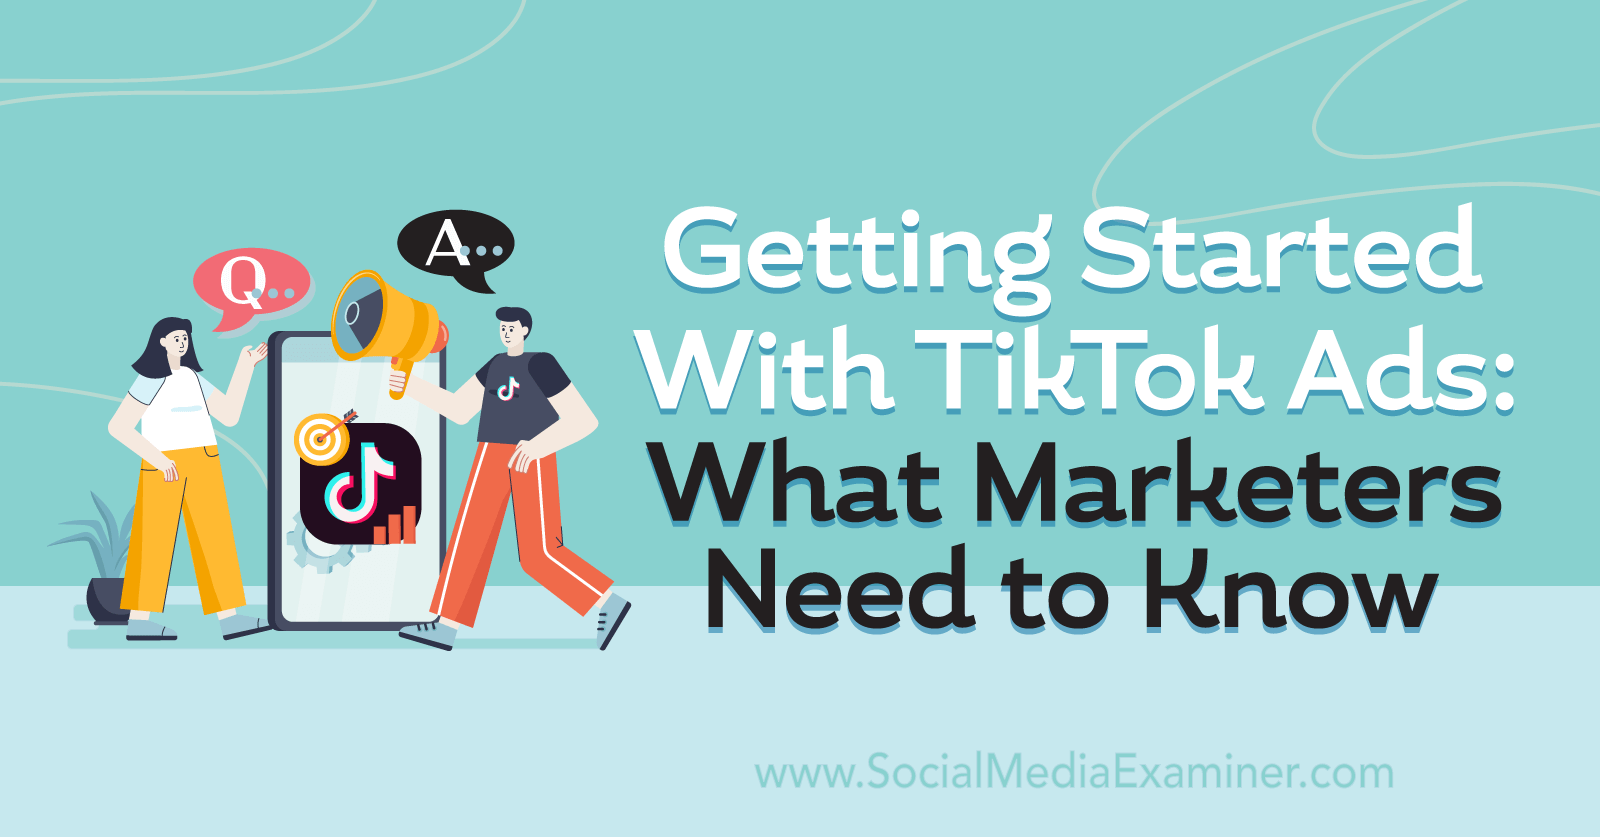 Getting Started With TikTok Ads: What Marketers Need to Know on Social Media Examiner.